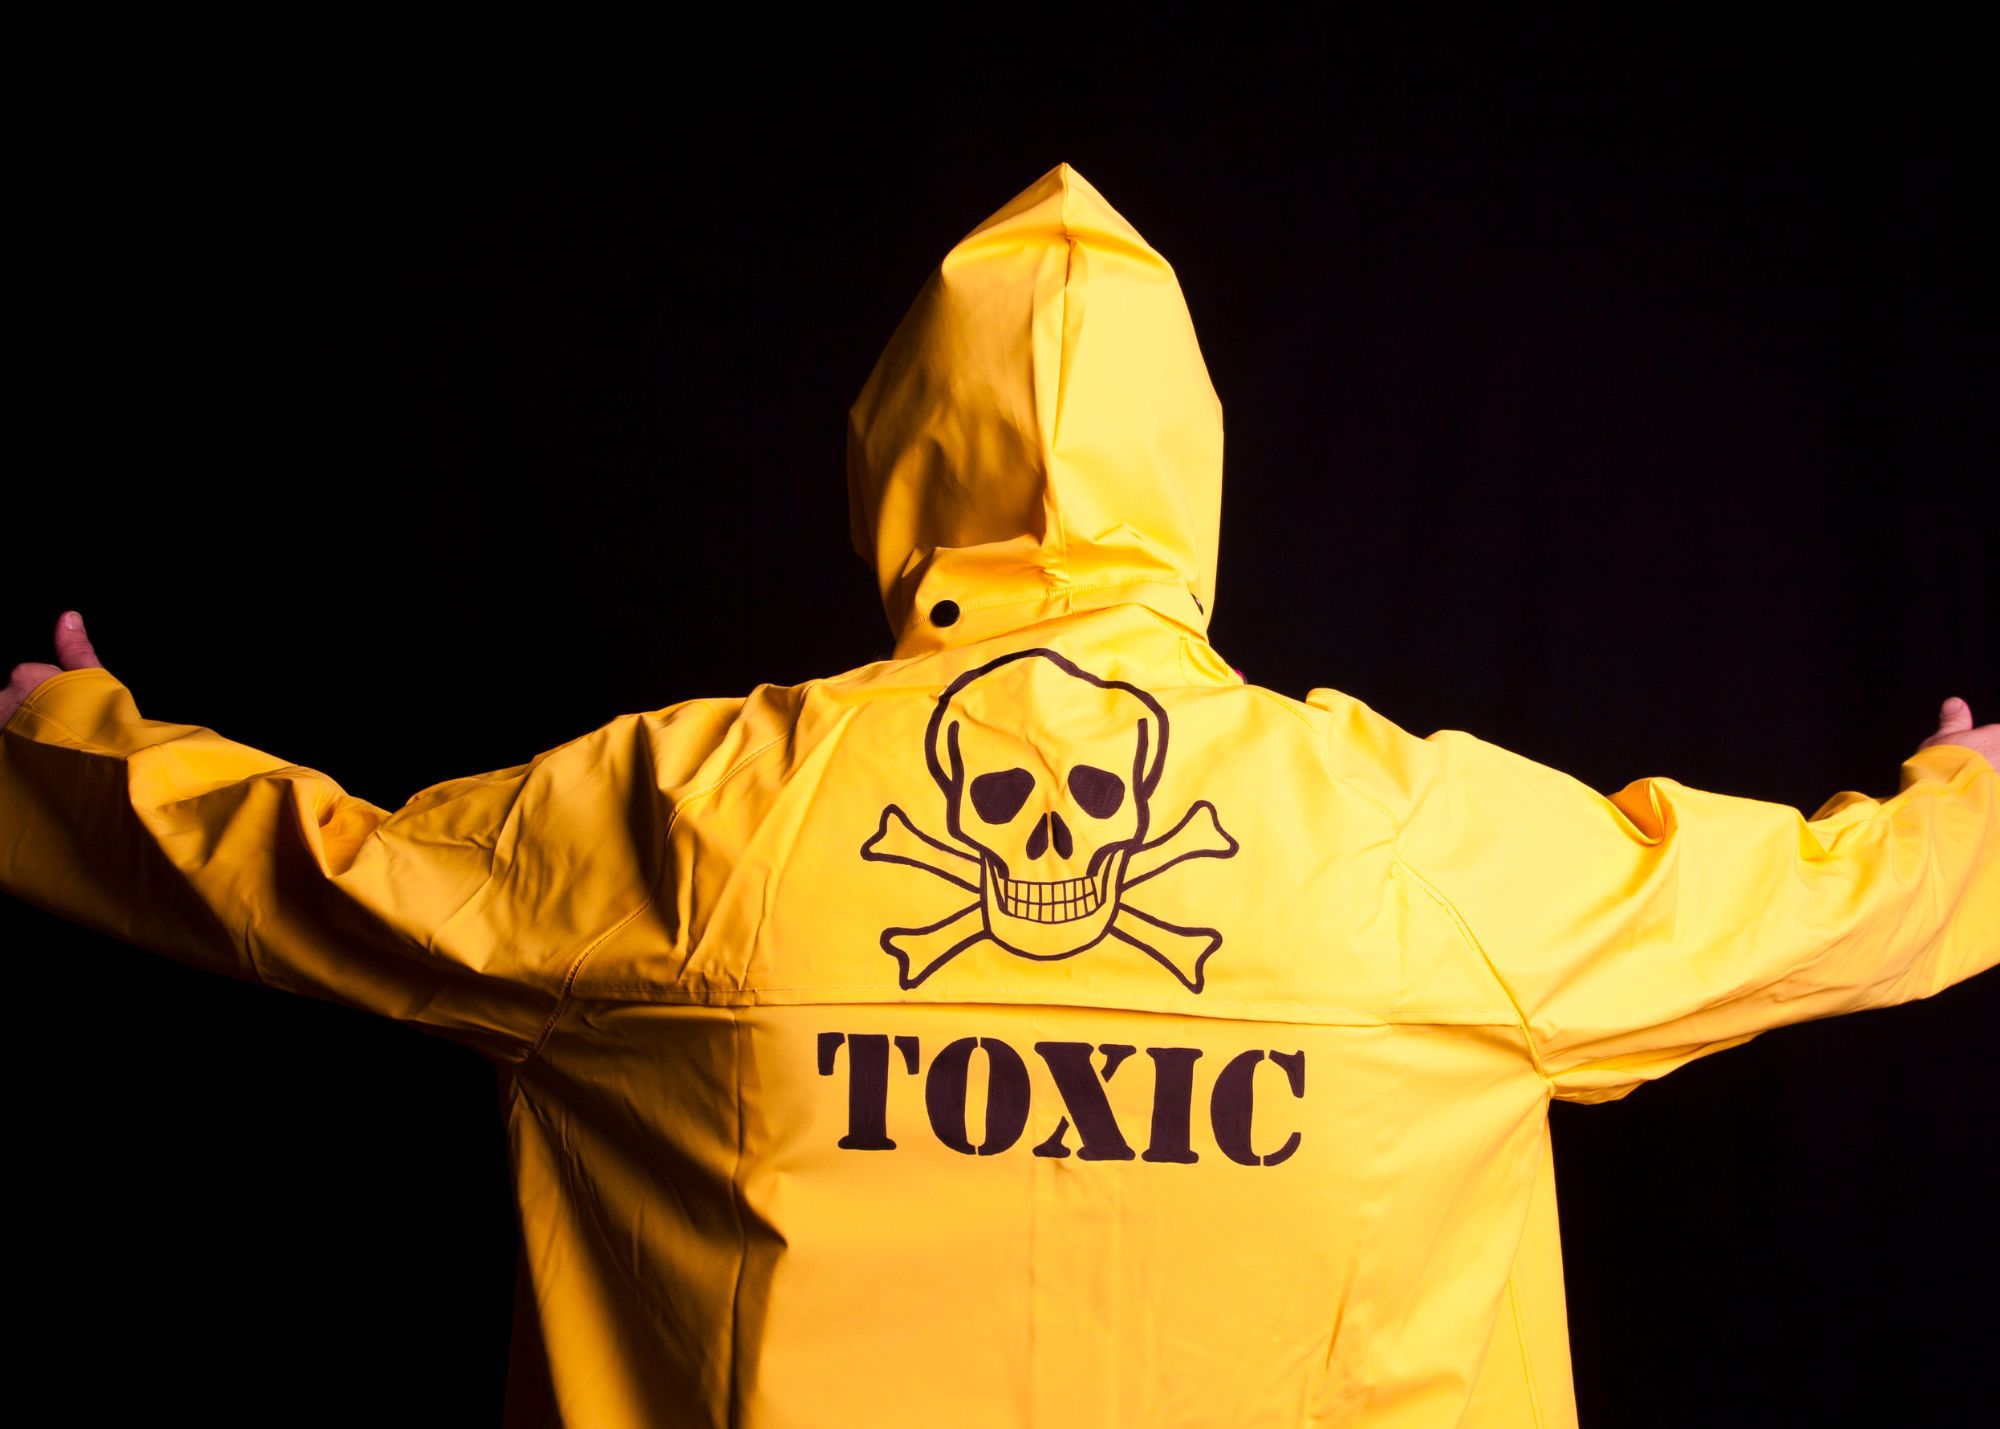 Image of the back of a person wearing a yellow rain jacket with the words toxic under the skull and bones symbol for poison.